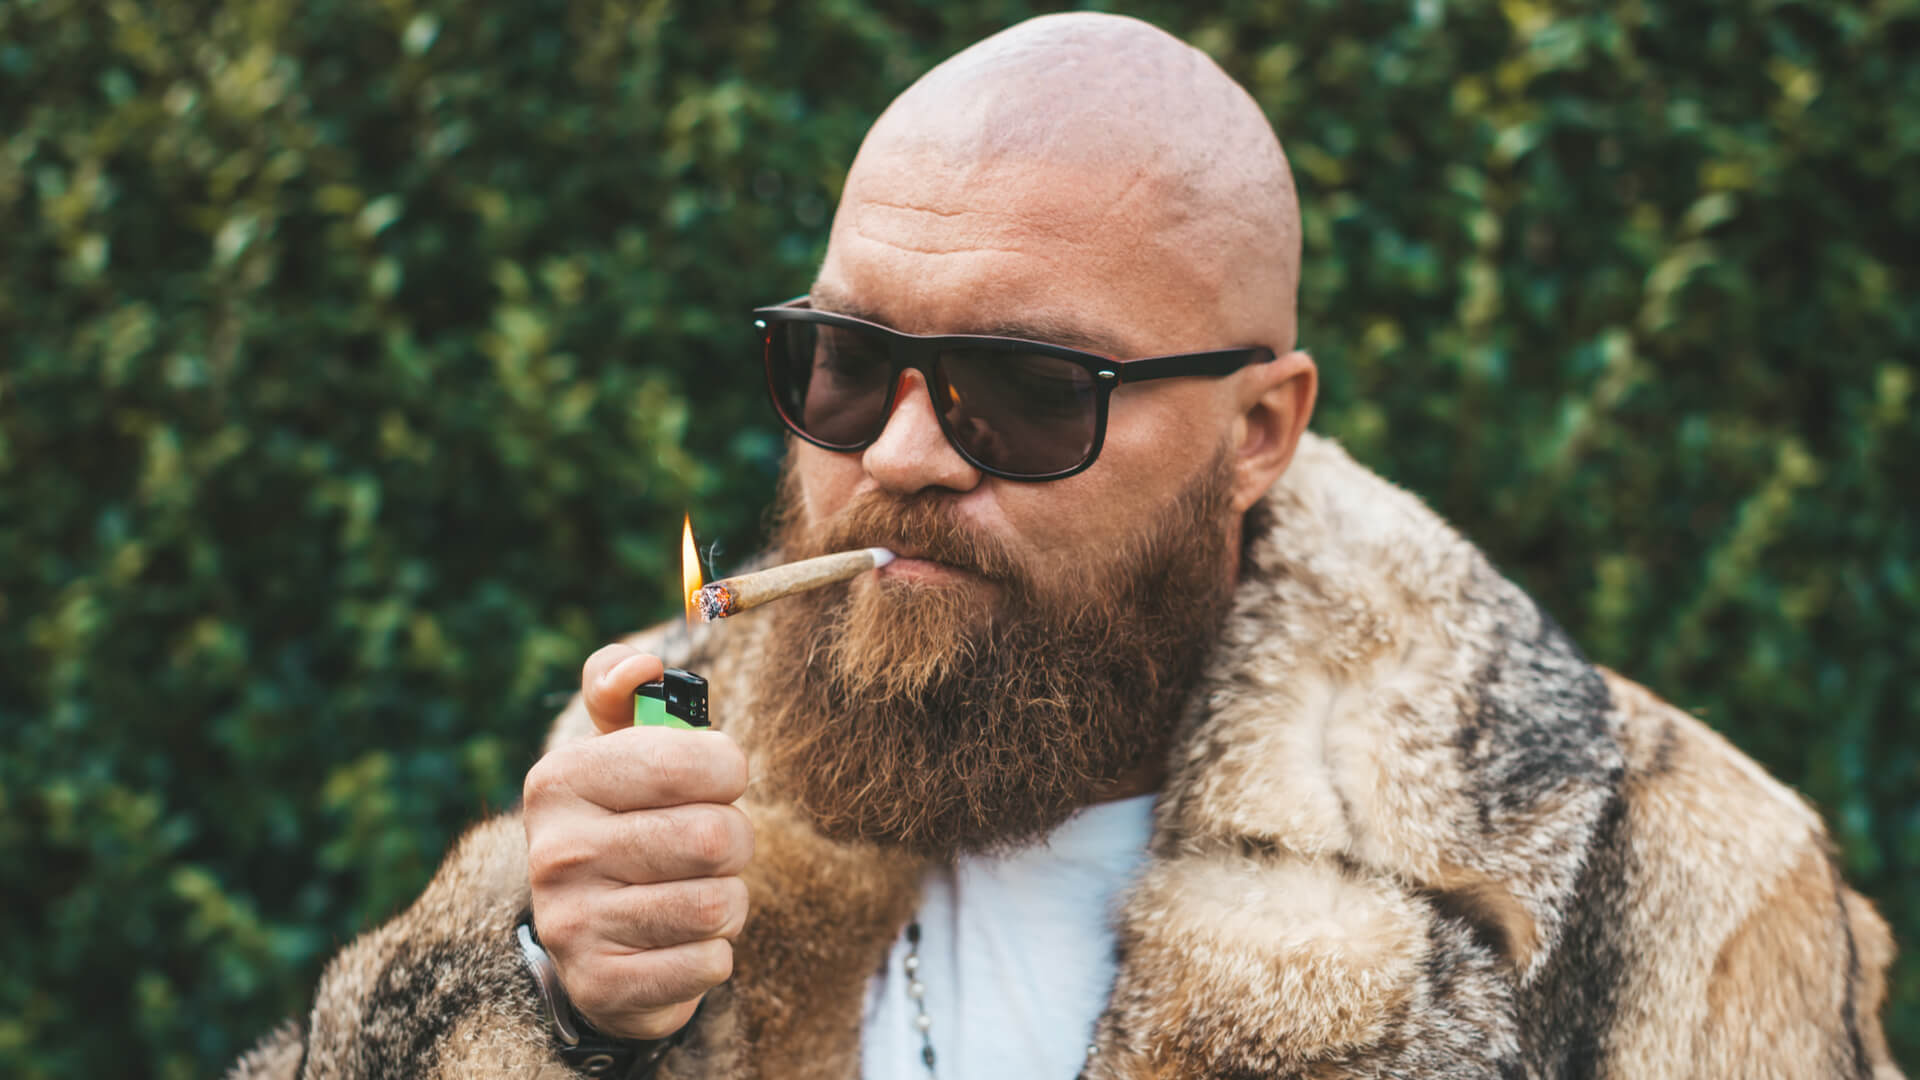 Bald and Bearded man with a fur jacket and sunglasses smoking a joint